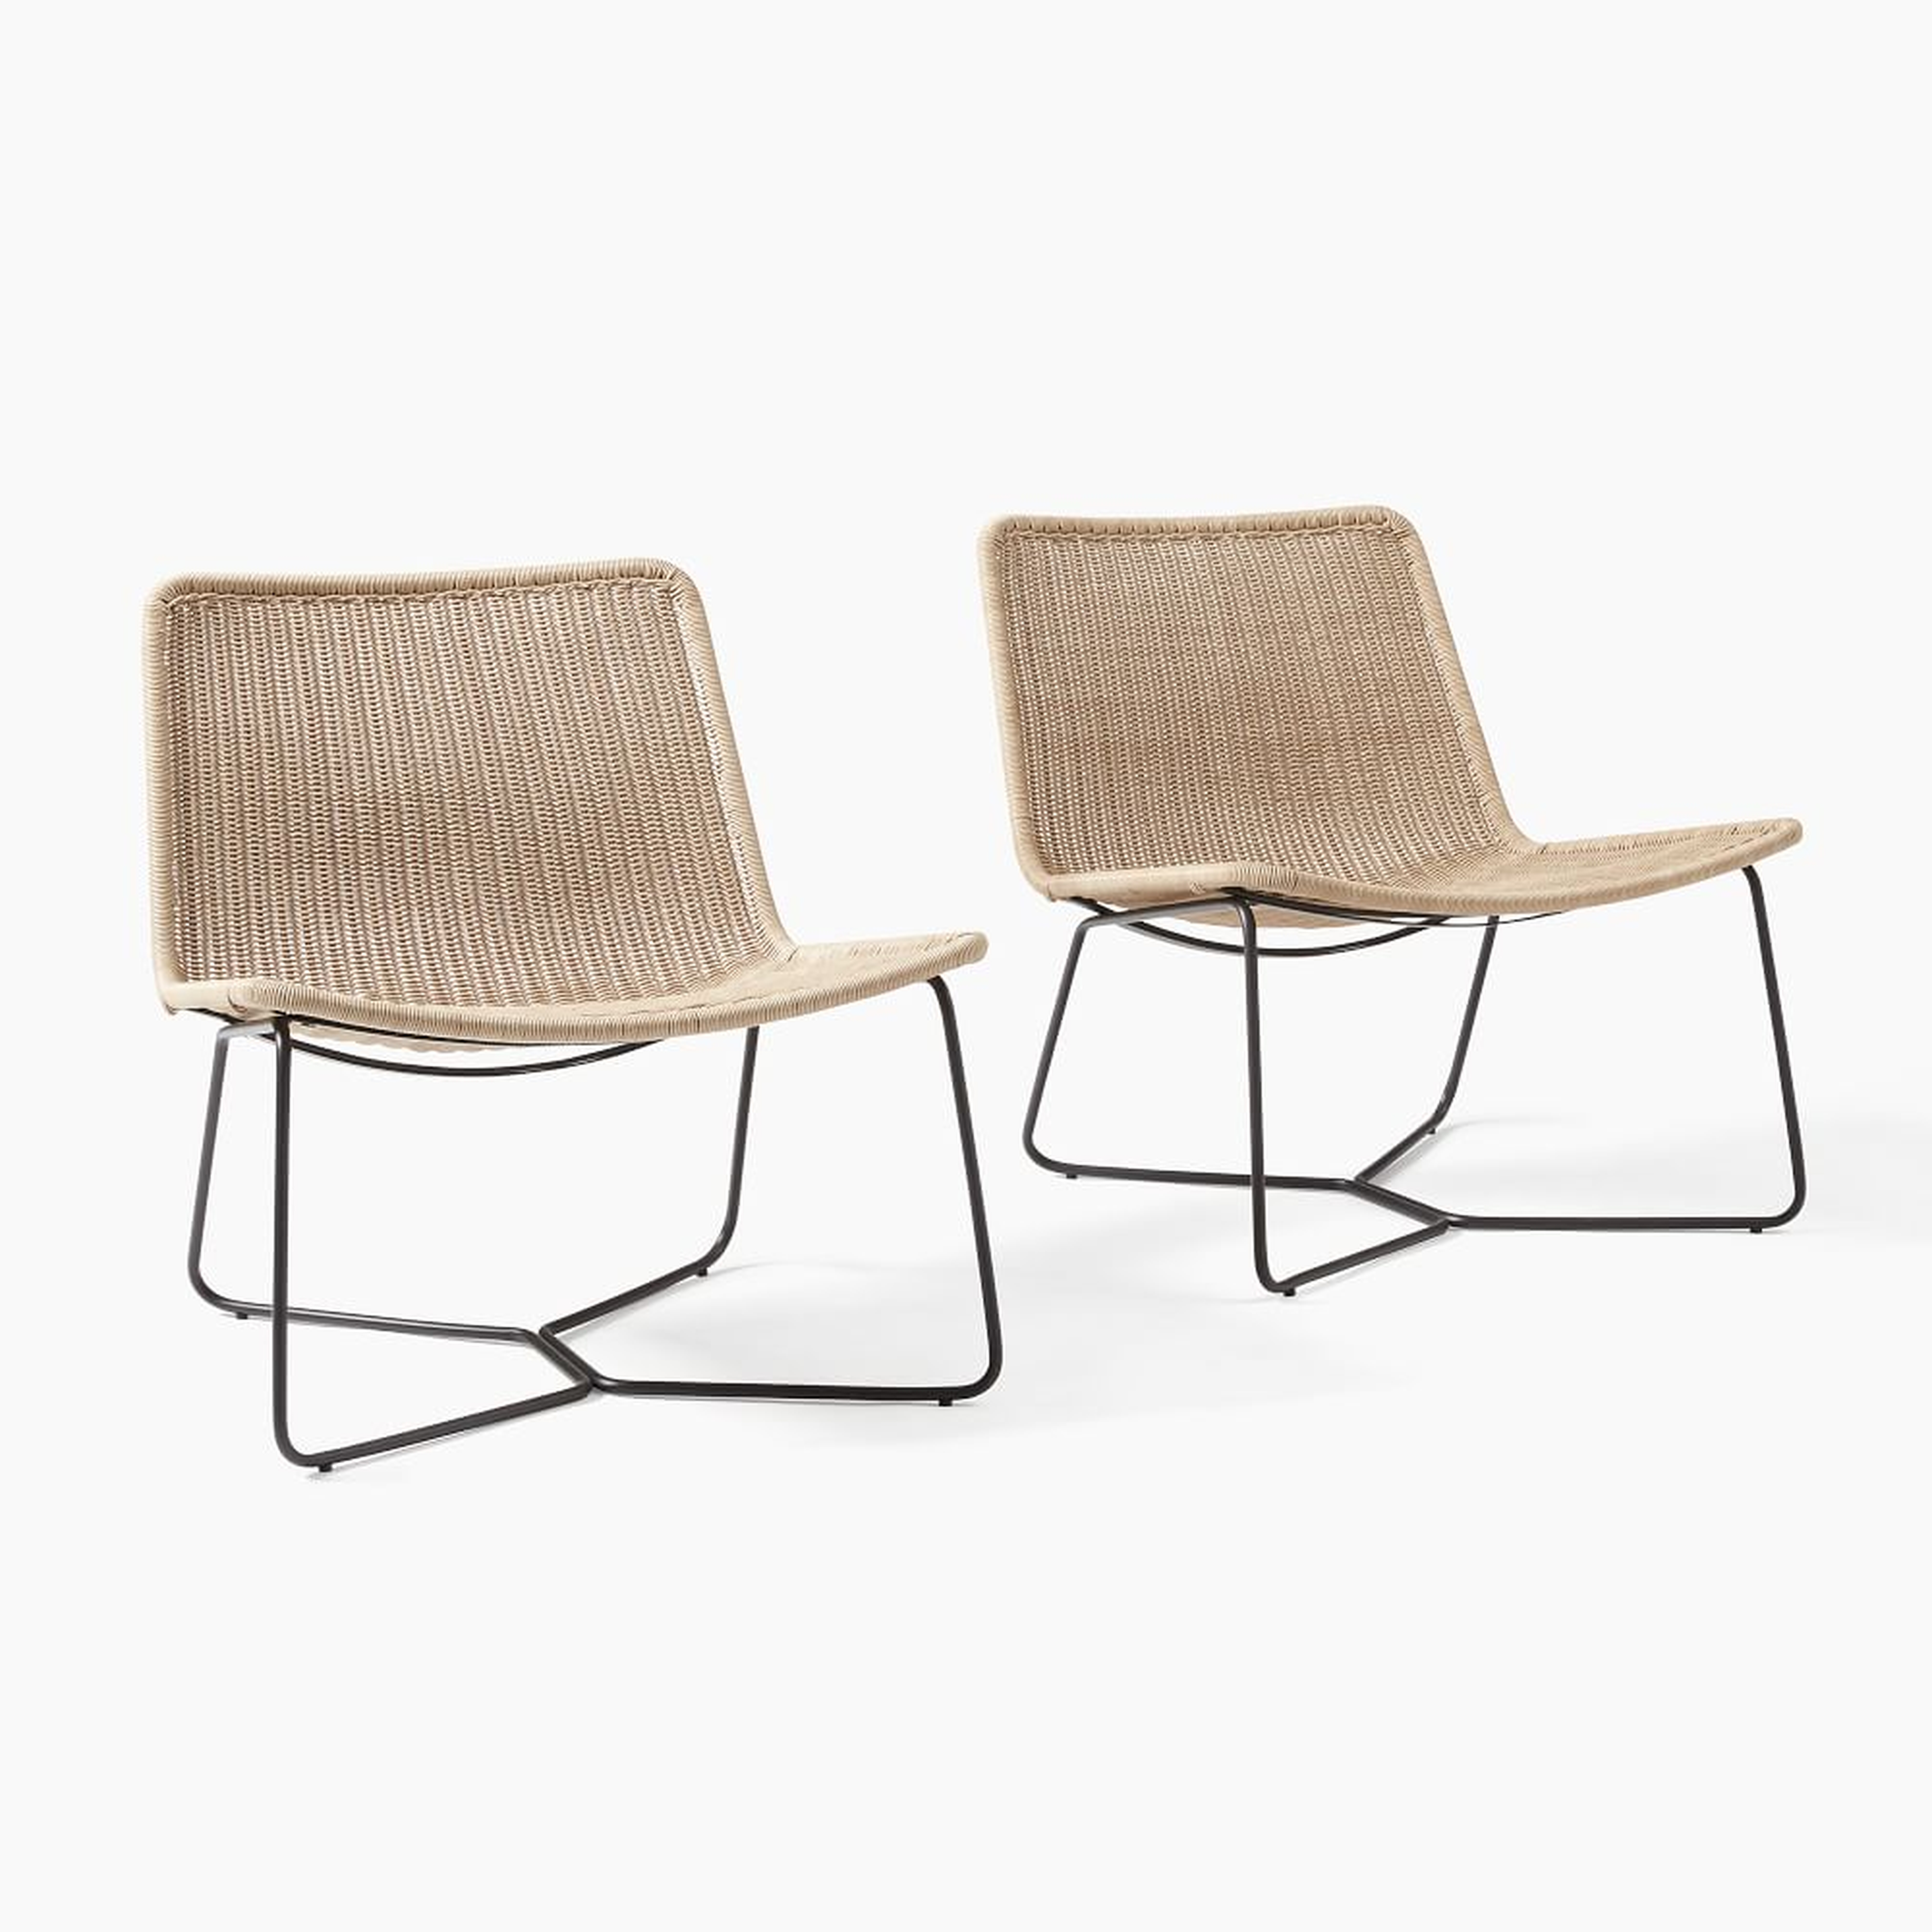 Slope Natural Lounge Chairs, Set of 2 - West Elm